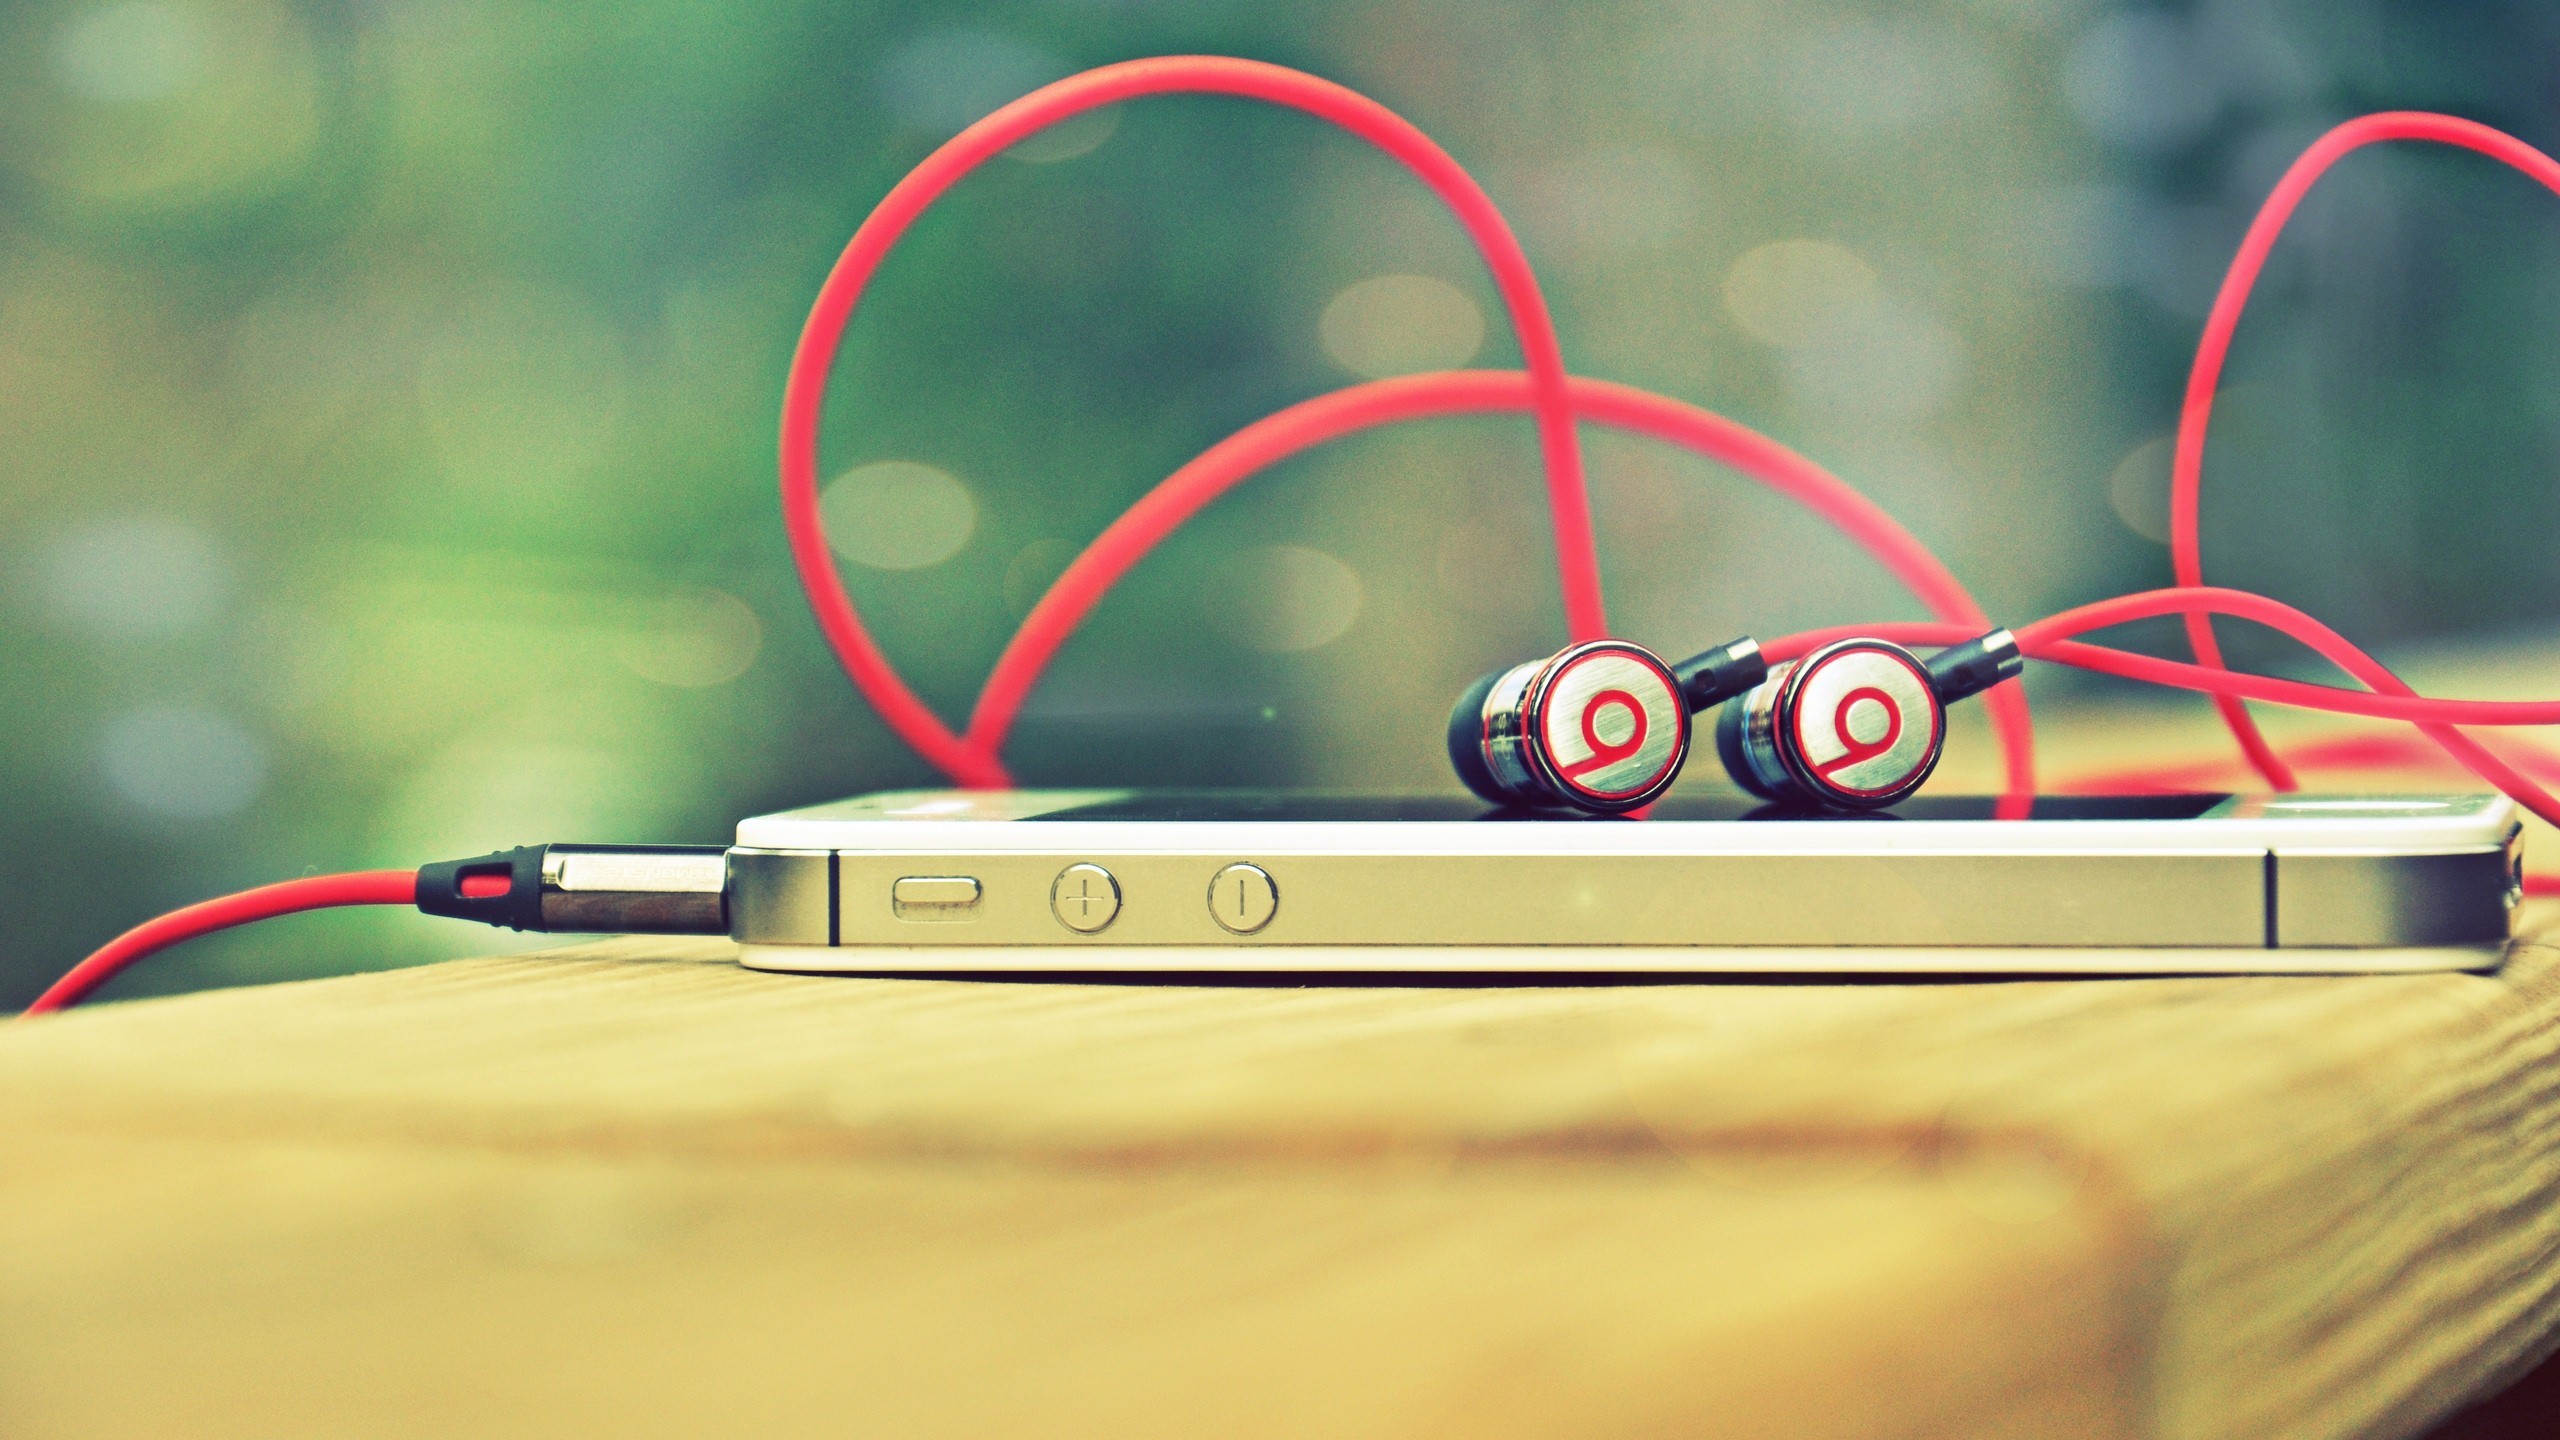 2560x1440 Iphone 5s the music